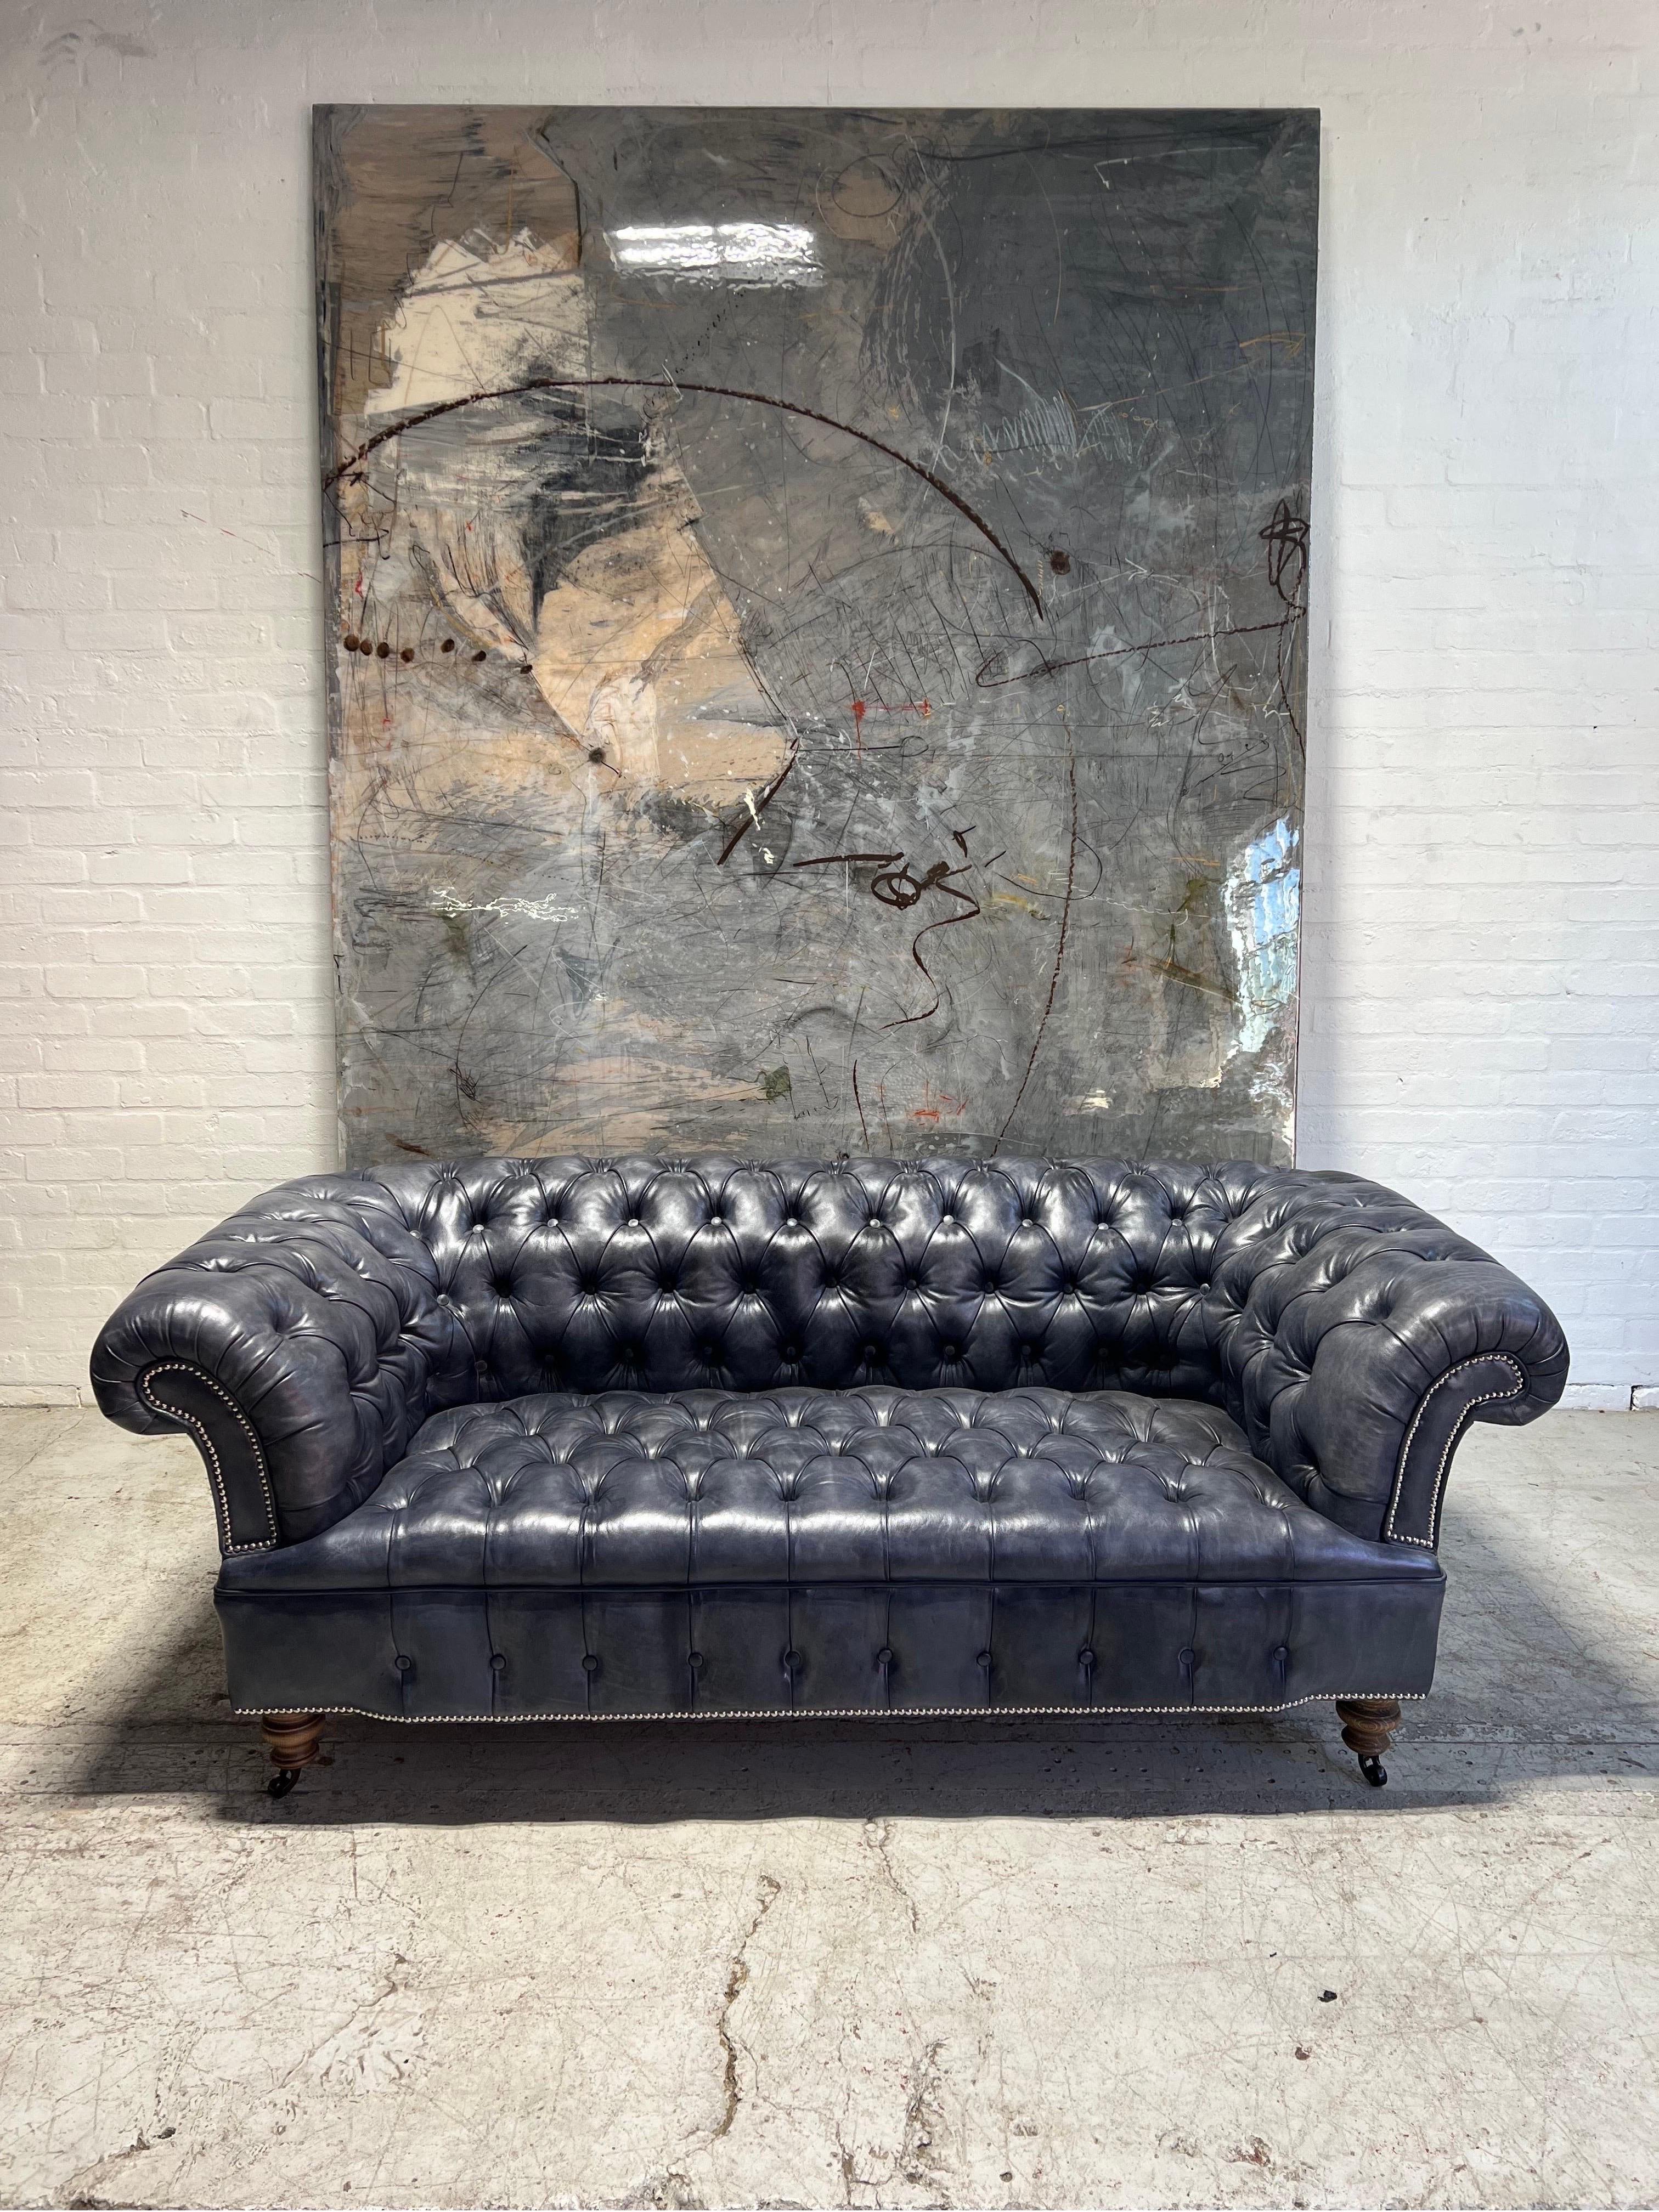 Our Howard Chesterfield sofa is a key piece from our Signature Collection and they can be finished in any hand dyed leathers or fabrics. 

All crafted in-house, we can build your pieces to any size, colour or fabric. we are truly a bespoke